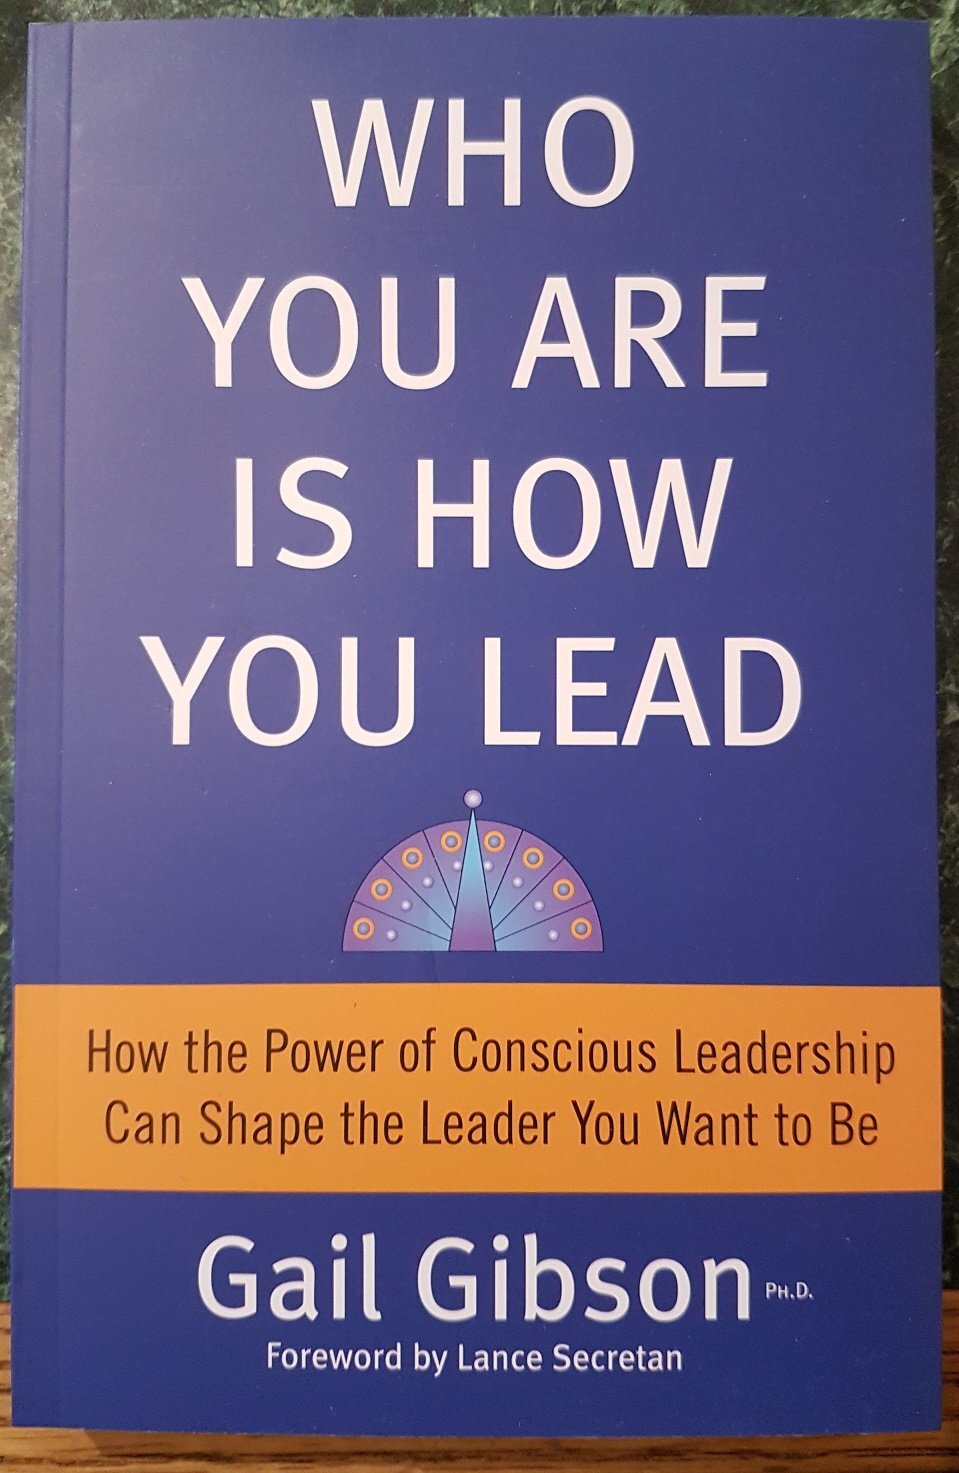 Who You Are Is How You Lead - Gail Gibson